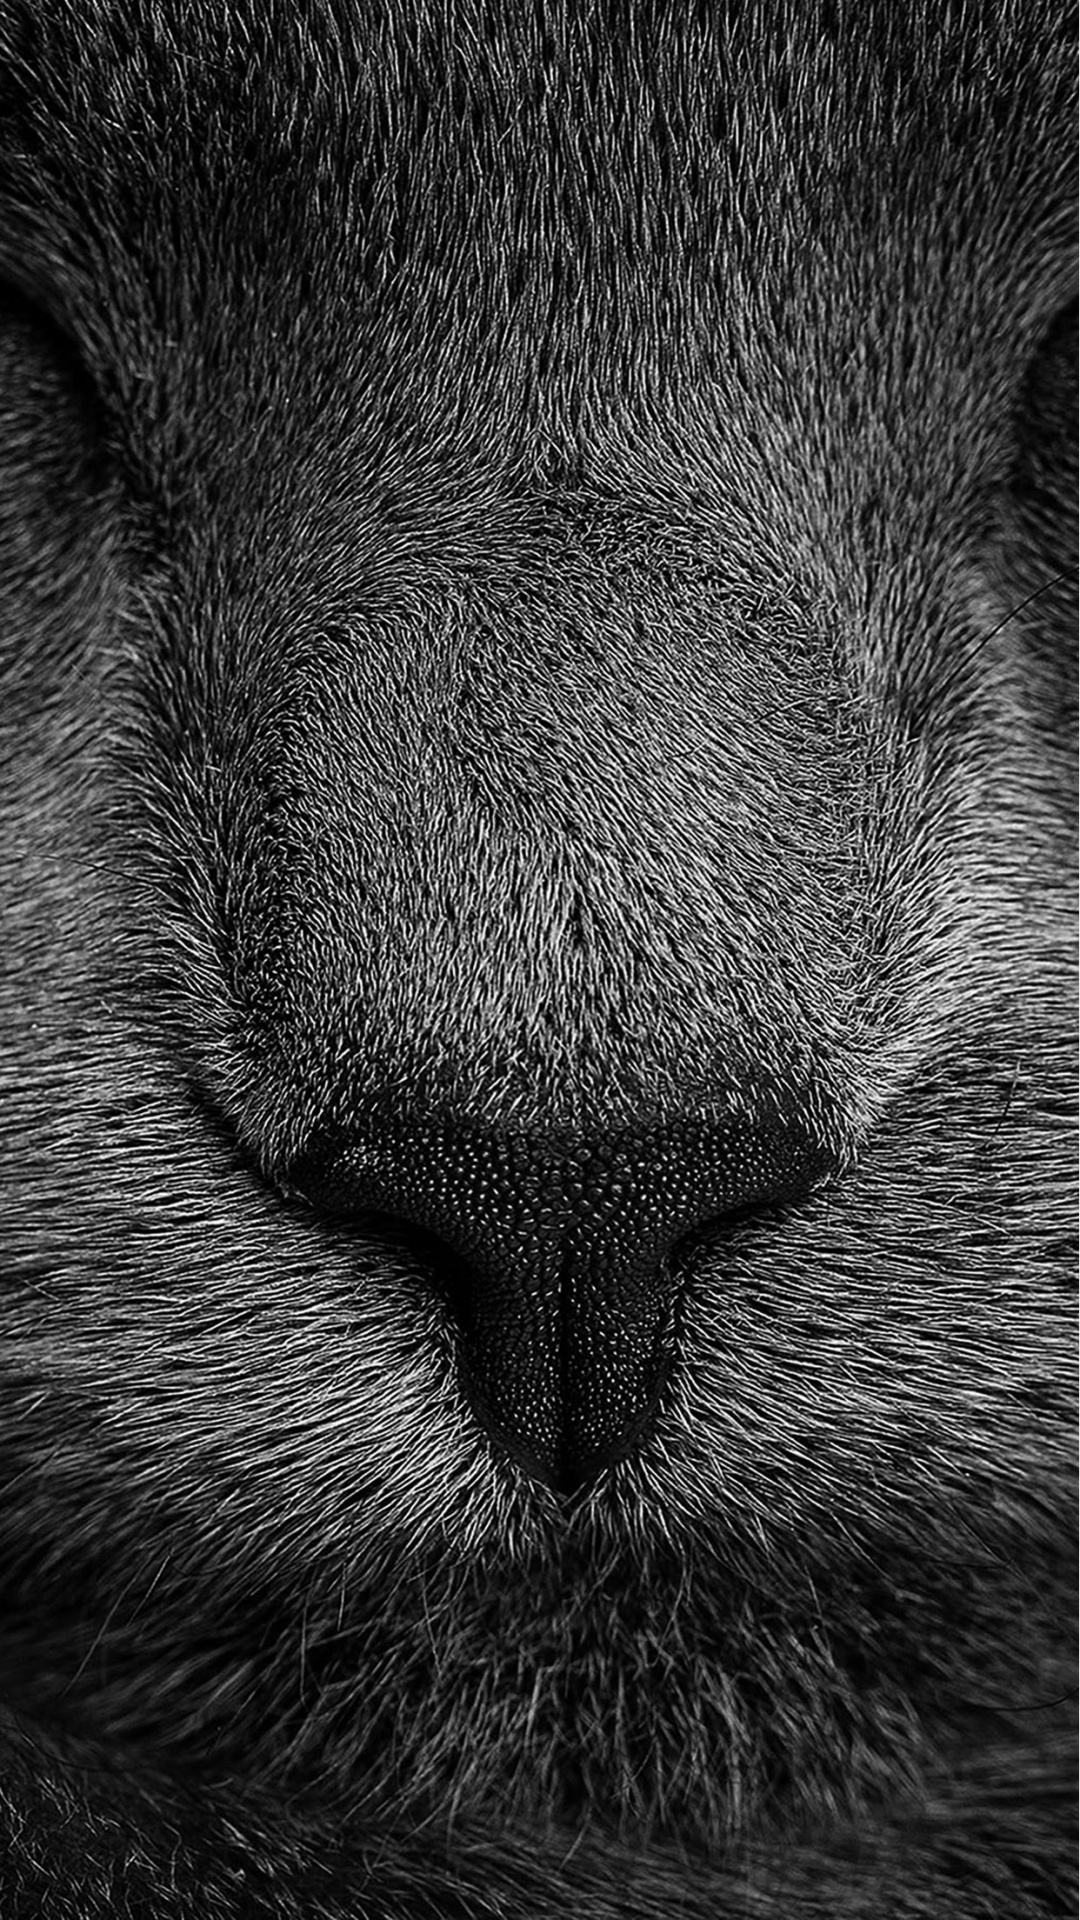 Grayscale Photo of Cats Eye. Wallpaper in 1080x1920 Resolution